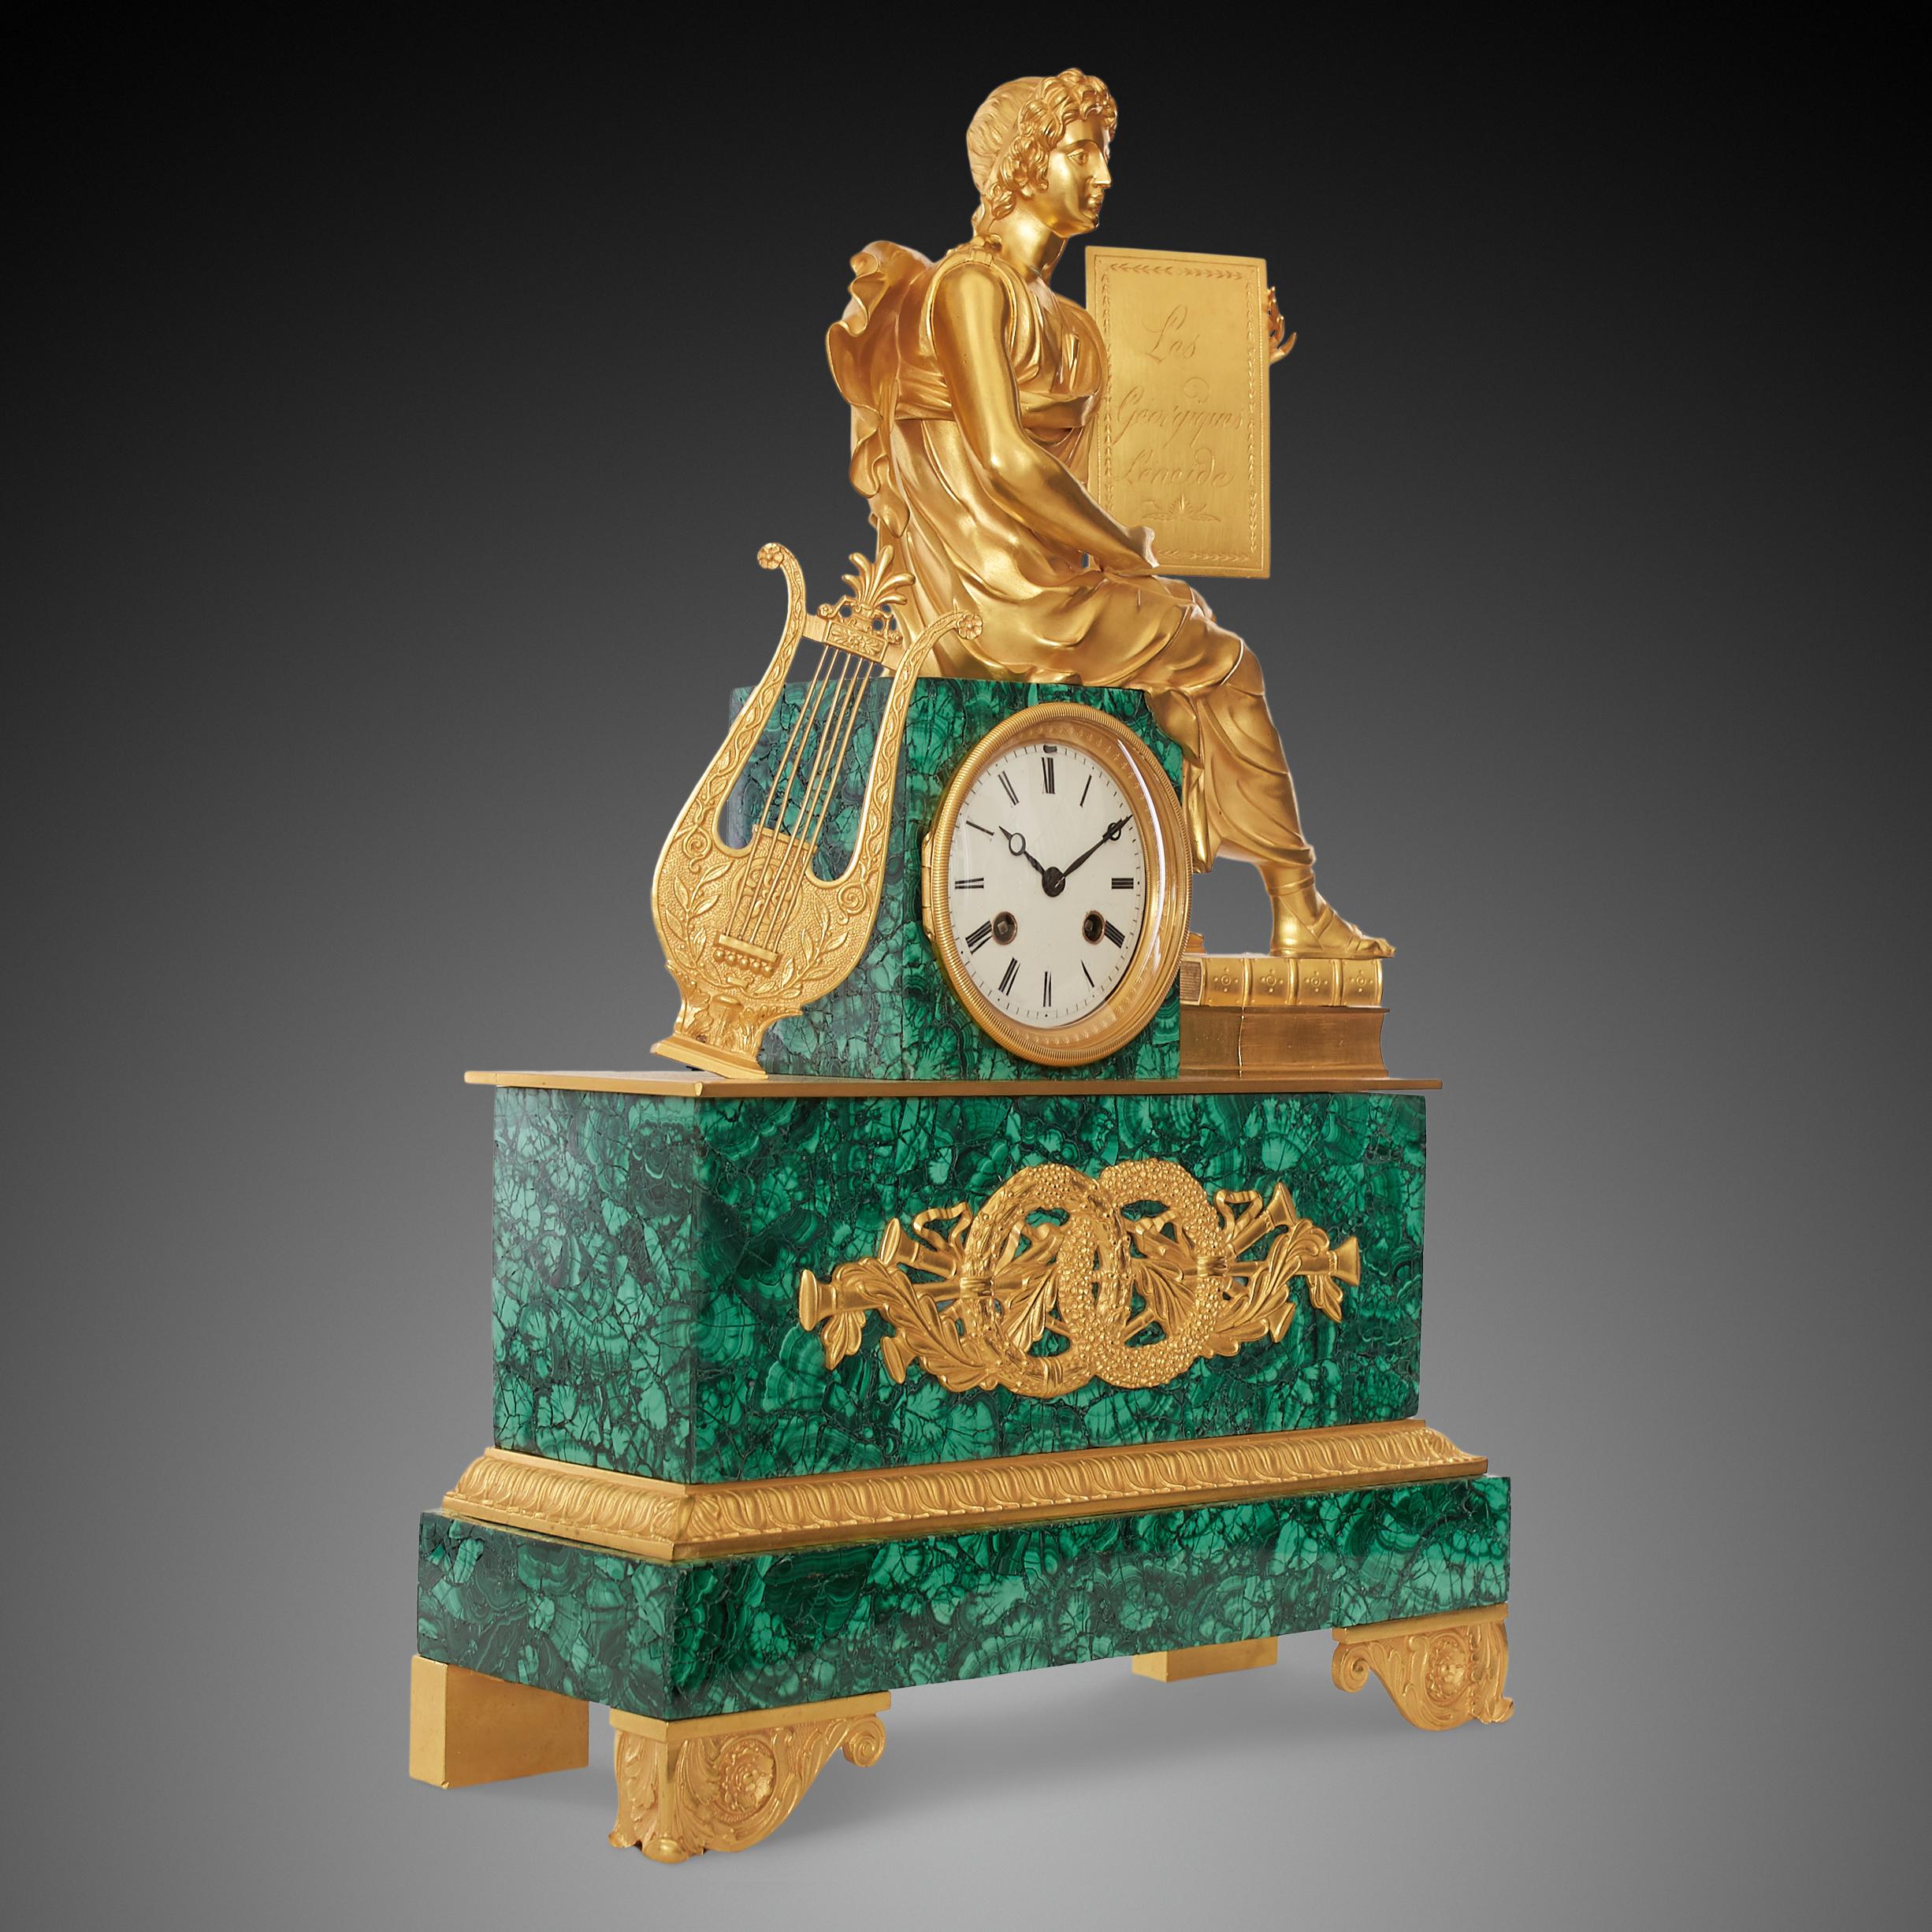 Empire pendulum clock
Depicting Virgil,an ancient Roman poet of the Augustan period.He has been traditionally ranked as one of Rome's greatest poets. His Aeneid is also considered a national epic of ancient Rome, a title held since composition.The